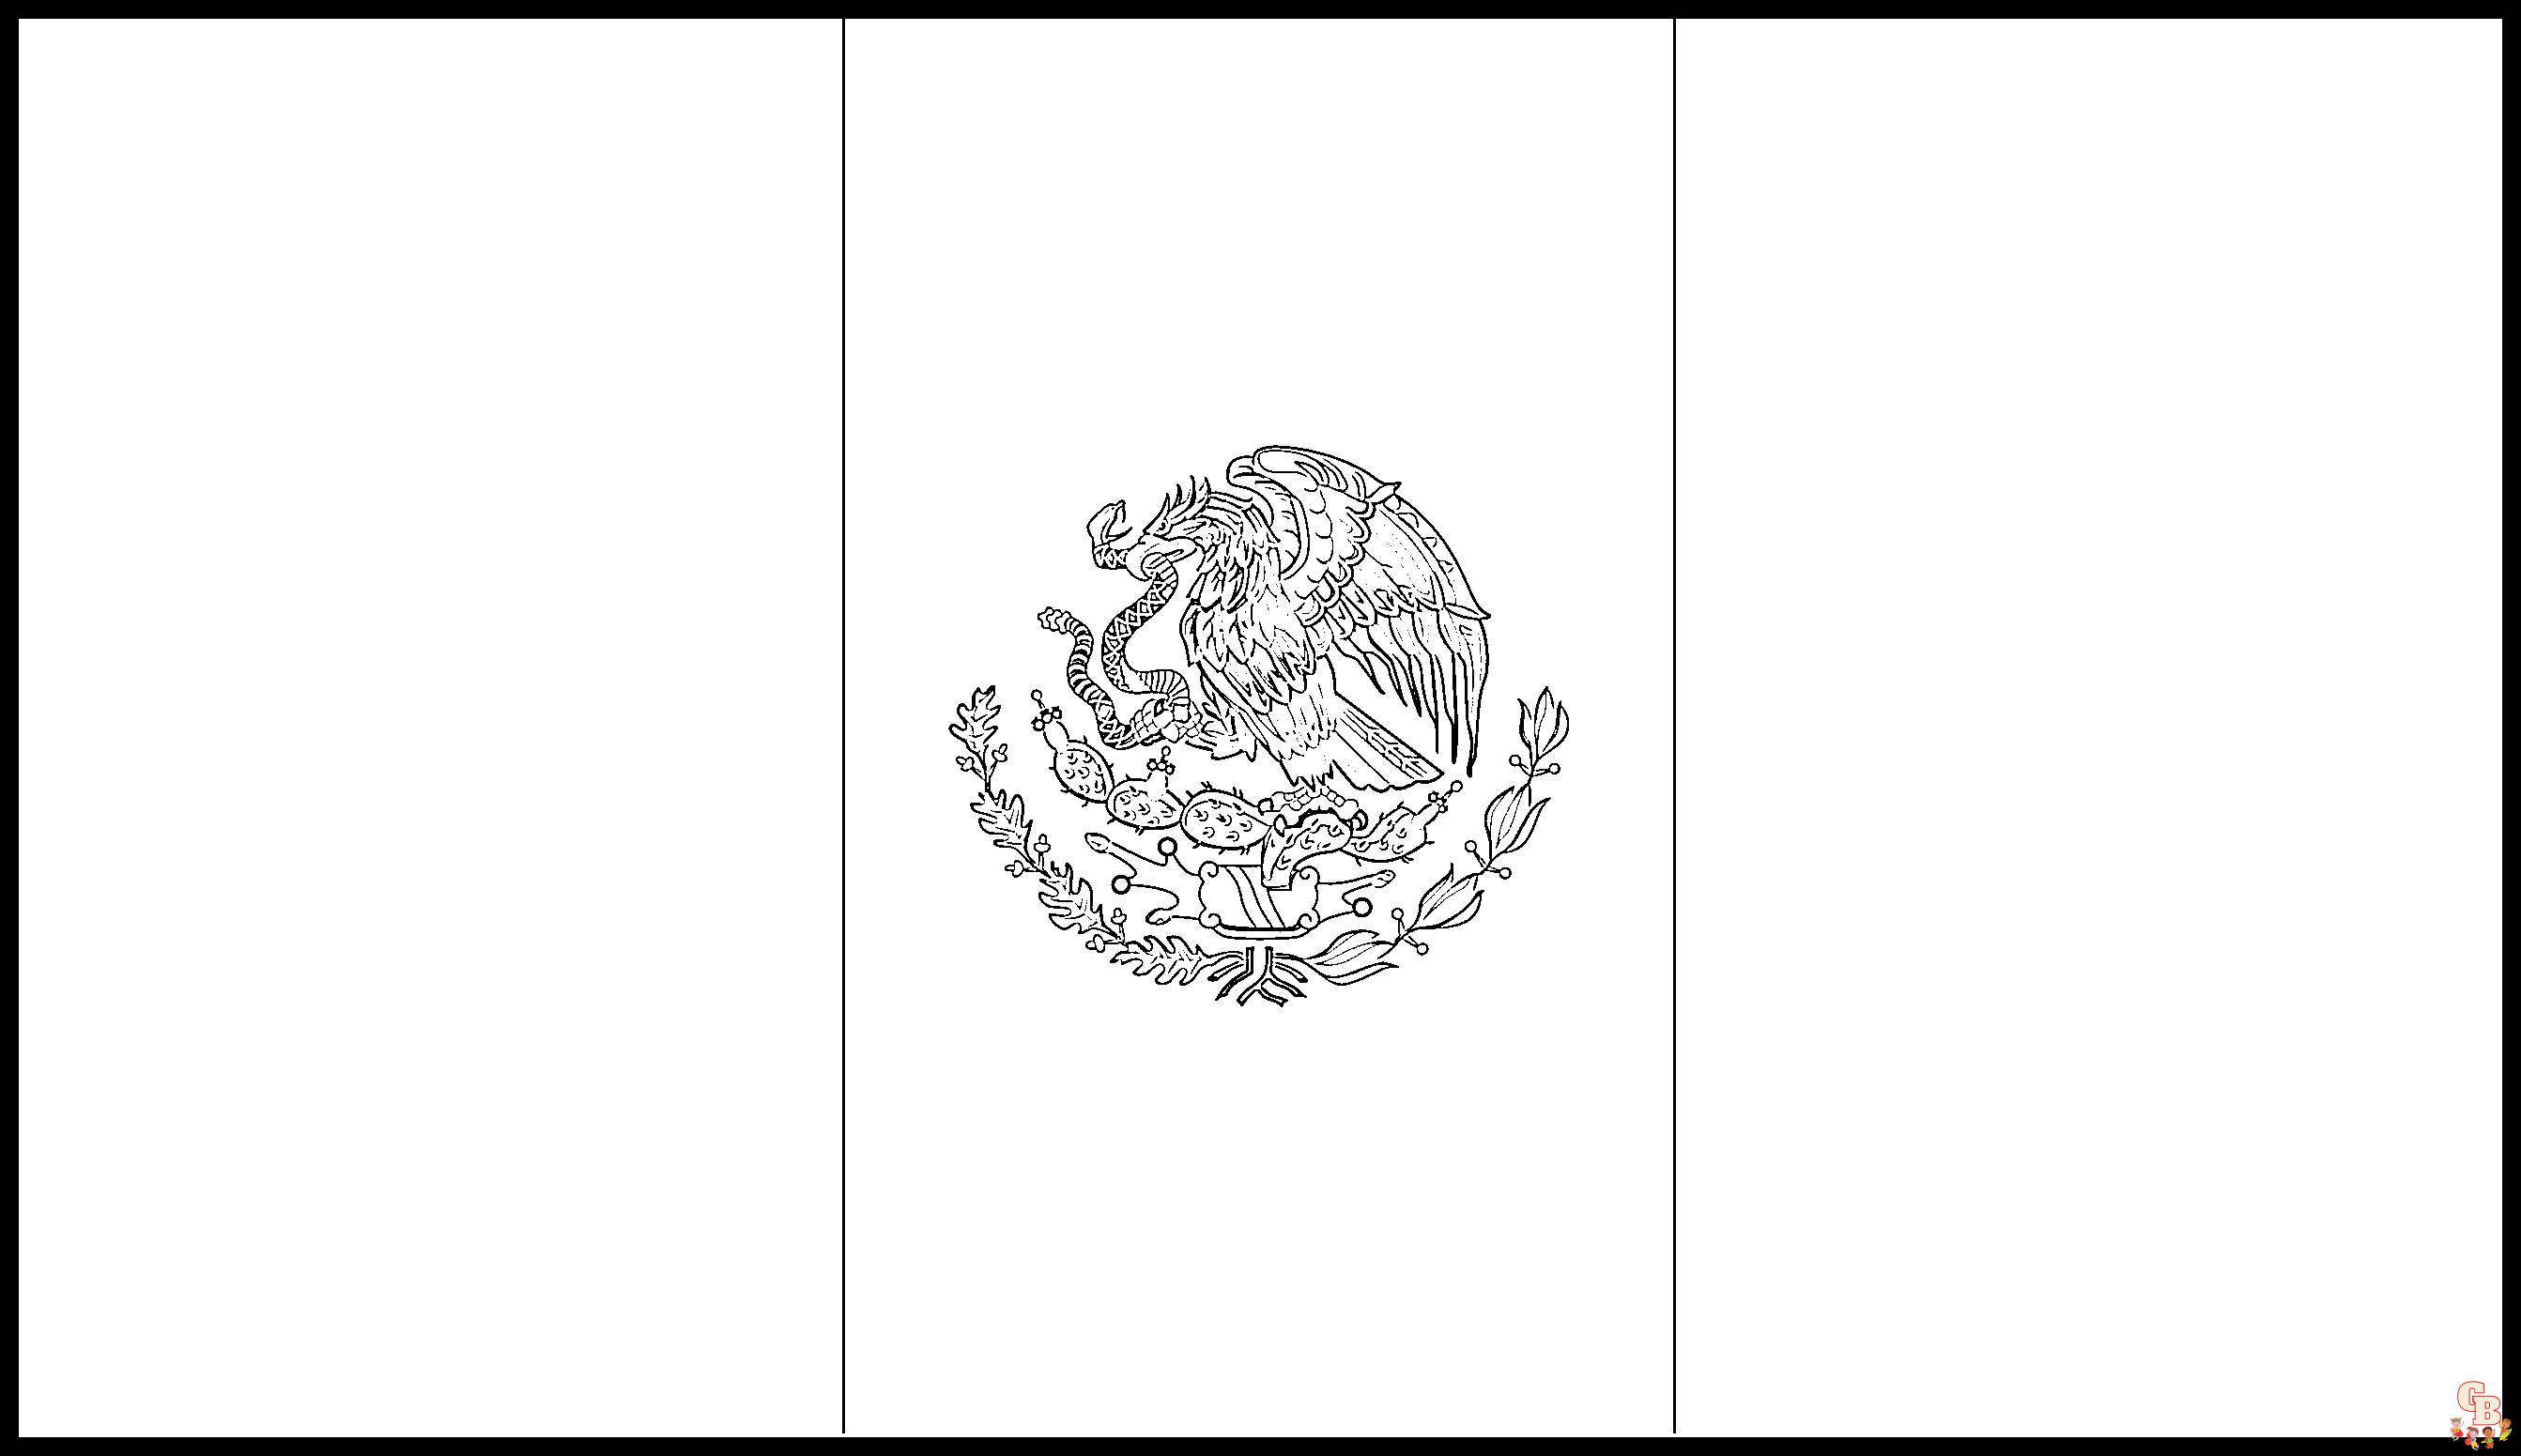 Mexico Flag Coloring Pages